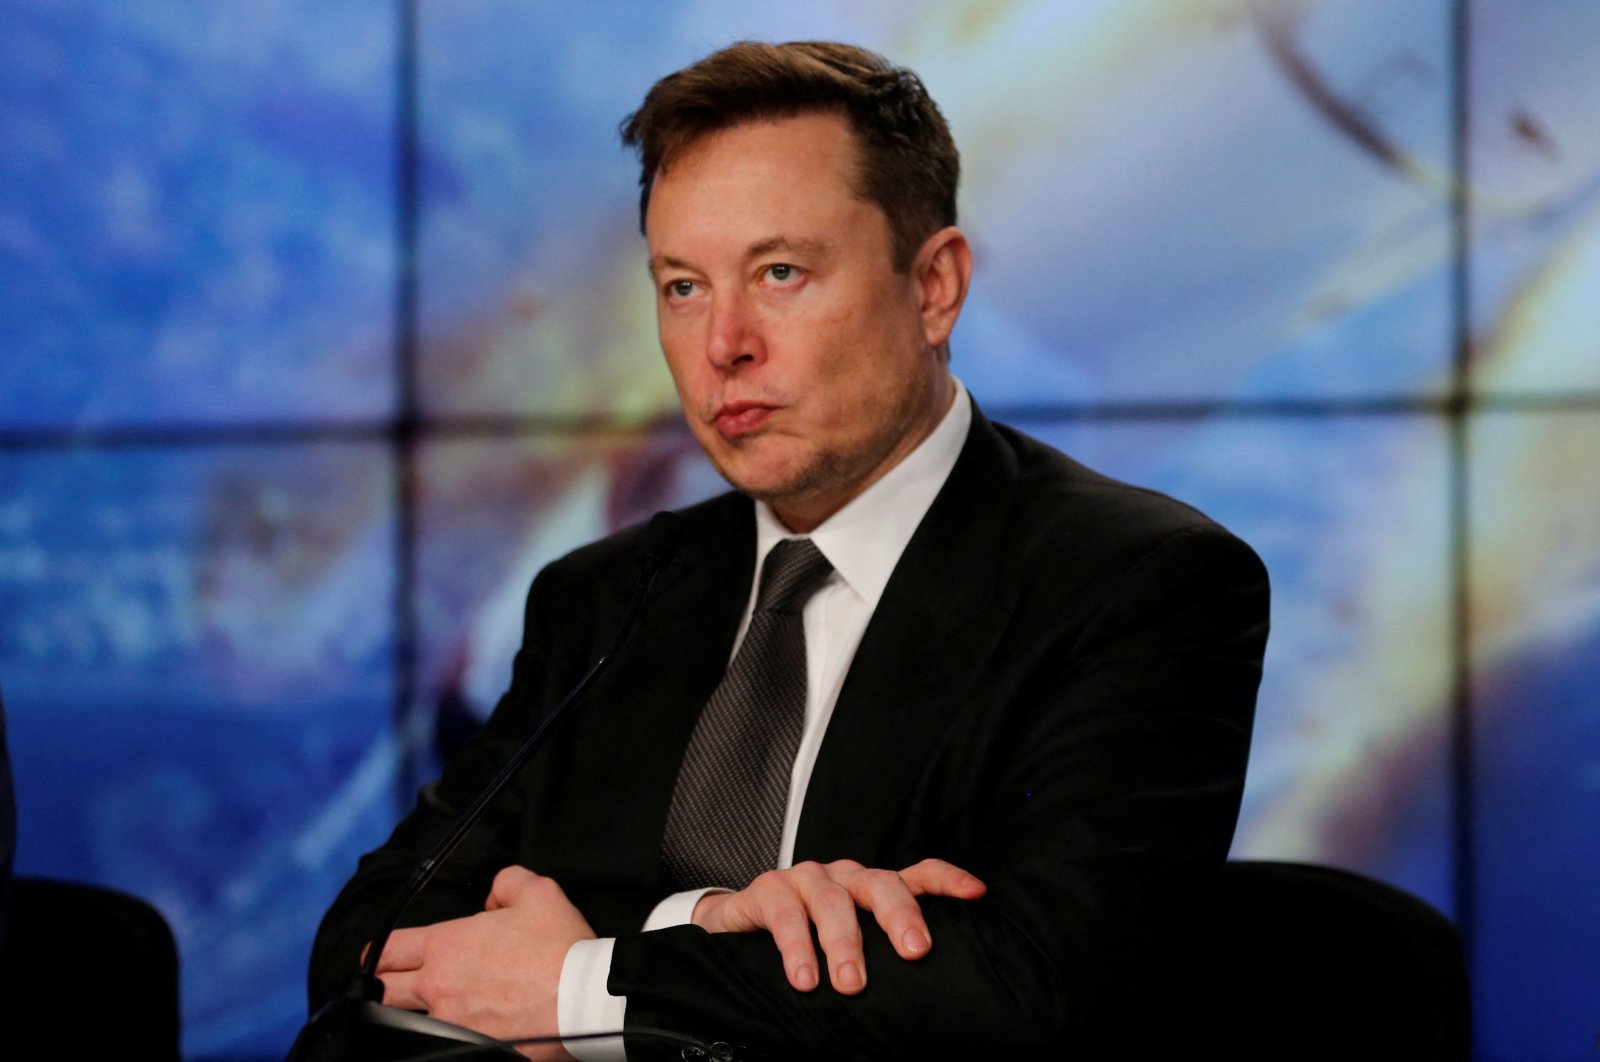 Elon Musk reacts at a post-launch news conference to discuss the SpaceX Crew Dragon astronaut capsule in-flight abort test at the Kennedy Space Center in Cape Canaveral, Florida, U.S. Jan. 19, 2020. (Reuters File Photo)